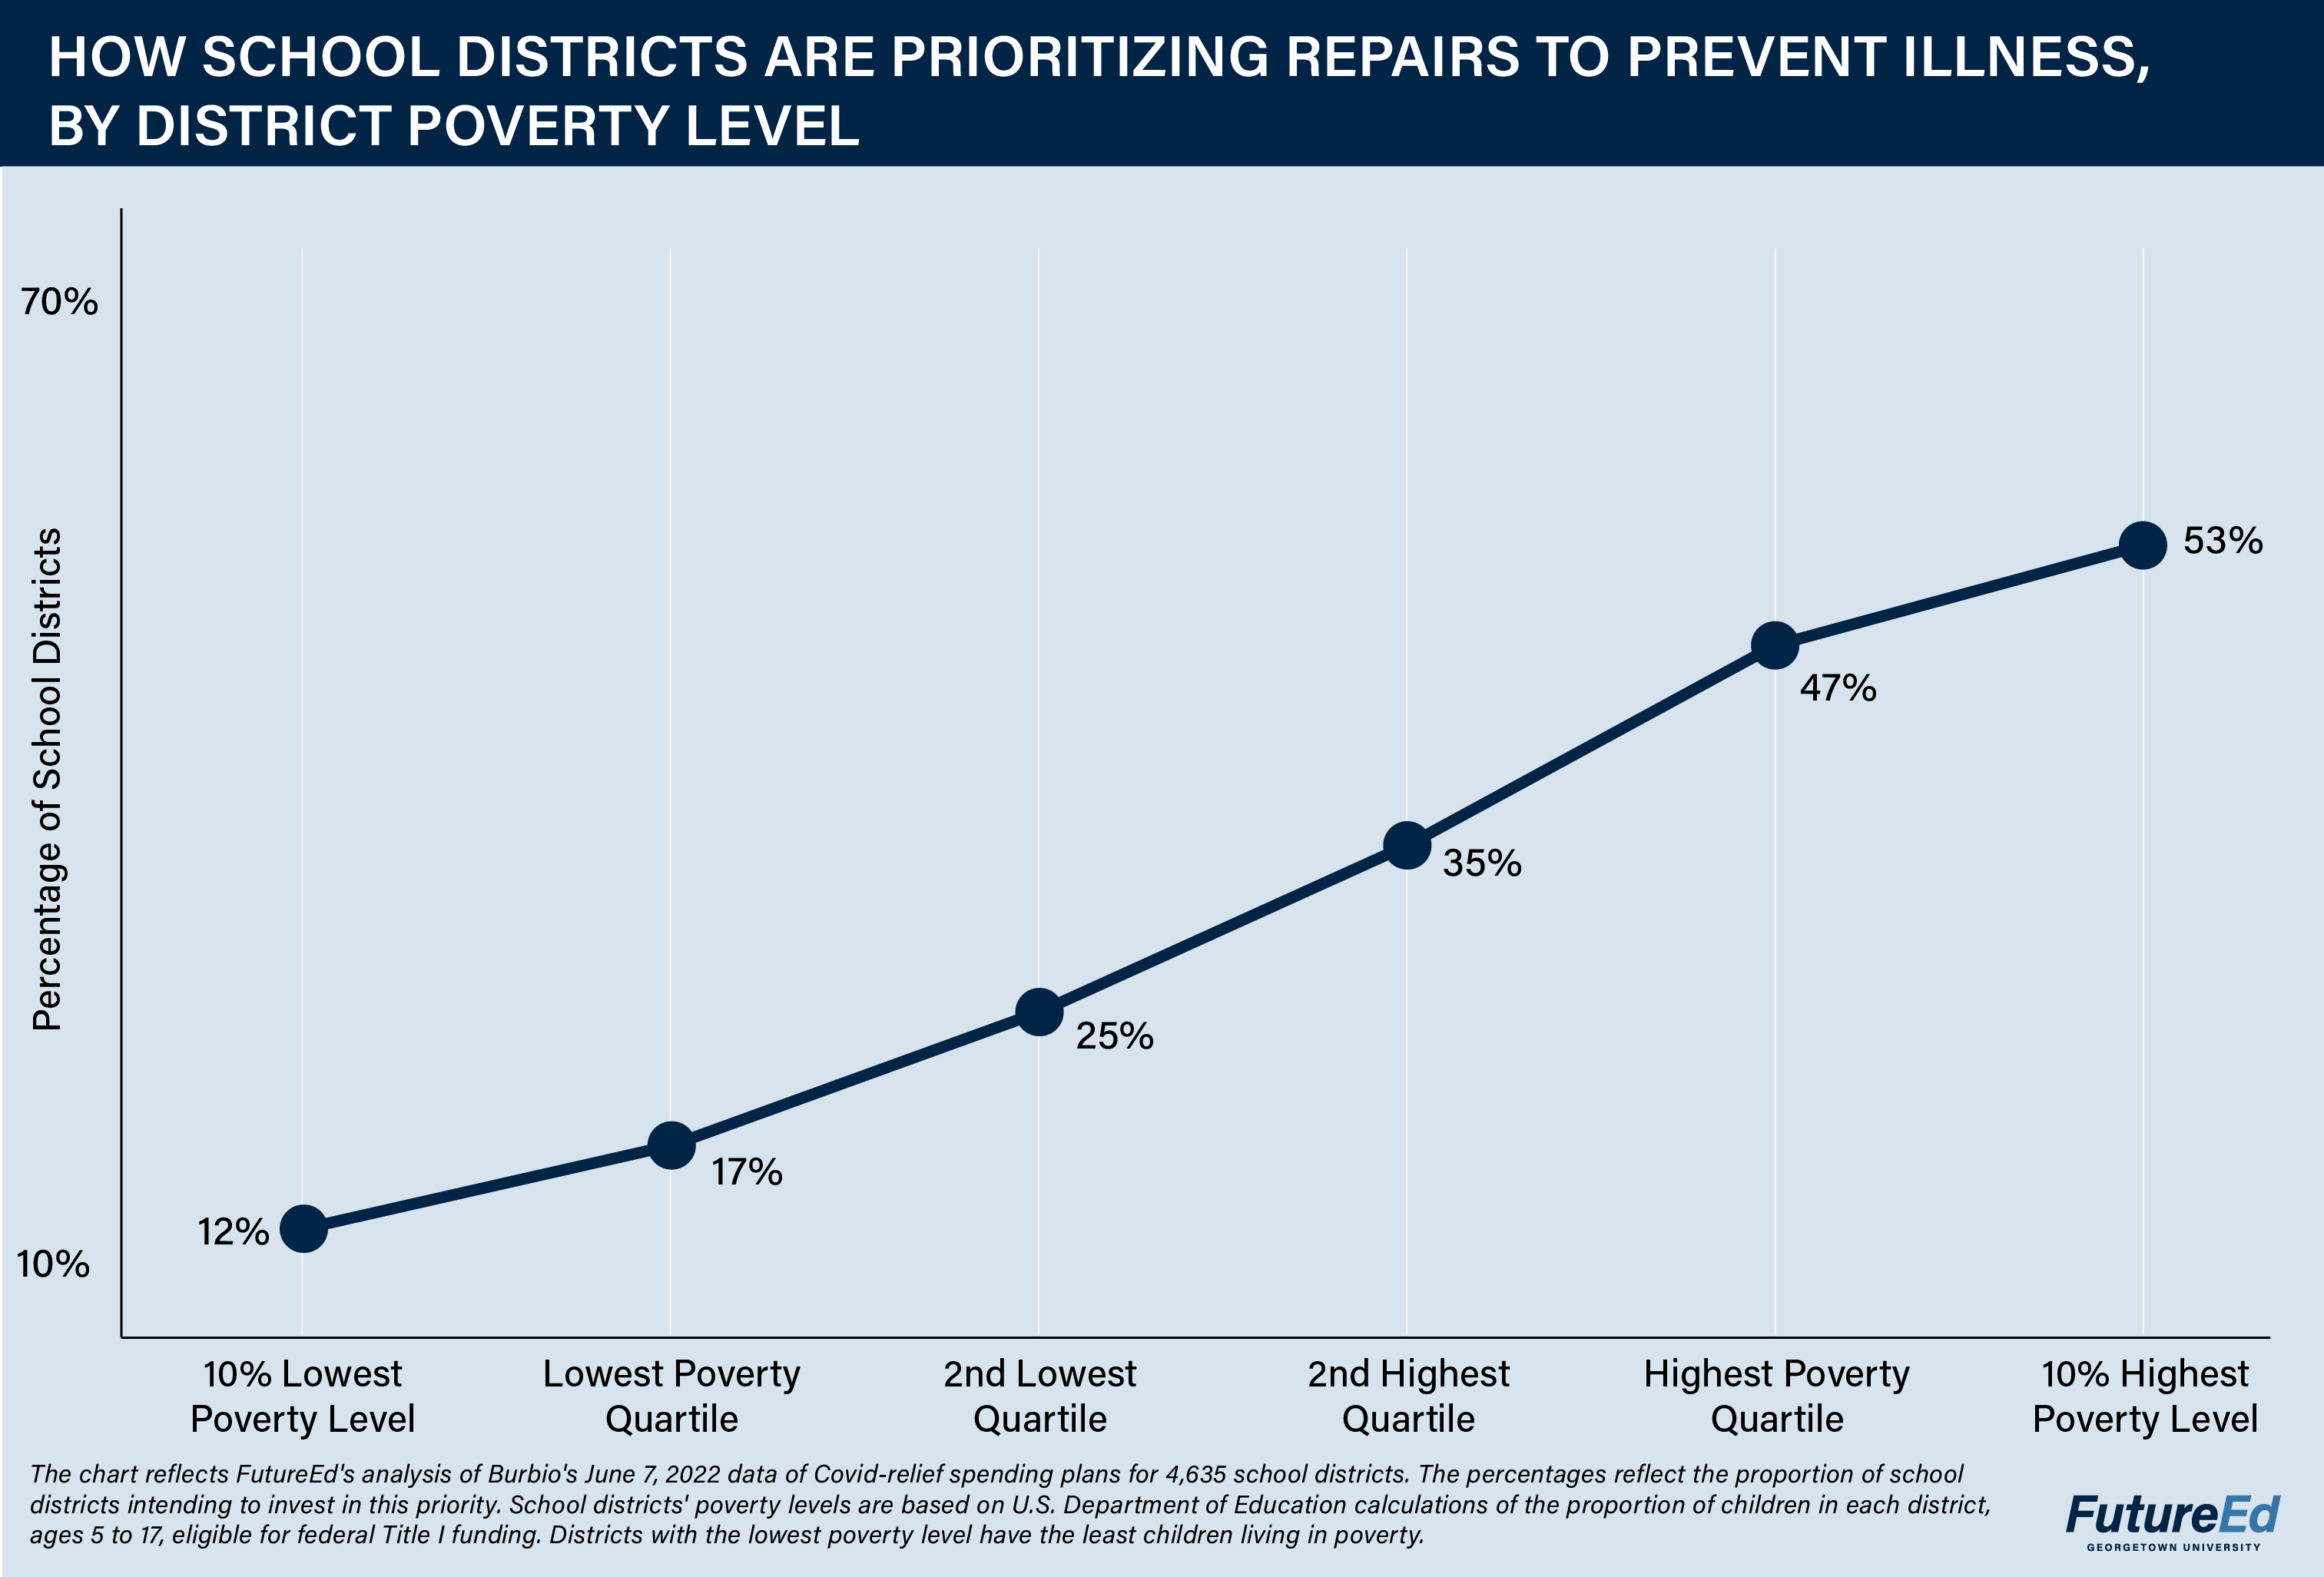 Chart: How School Districts Are Prioritizing Repairs to Prevent Illness, by District Poverty Level. Percentage of school districts. 10% lowest poverty level: 12%. Lowest poverty quartile: 17%. 2nd lowest quartile: 25%. 2nd highest quartile: 35%. Highest poverty quartile: 47%. 10% highest poverty level: 53%. (The chart reflects FutureEd's analysis of Burbio's June 7, 2022 data of Covid-relief spending plans for 4,635 school districts. The percentages reflect the proportion of school districts intending to invest in this priority. School districts' poverty levels are based on U.S. Department of Education calculations of the proportion of children in each district, ages 5 to 17, eligible for federal Title I funding. Districts with the lowest poverty level have the least children living in poverty.)